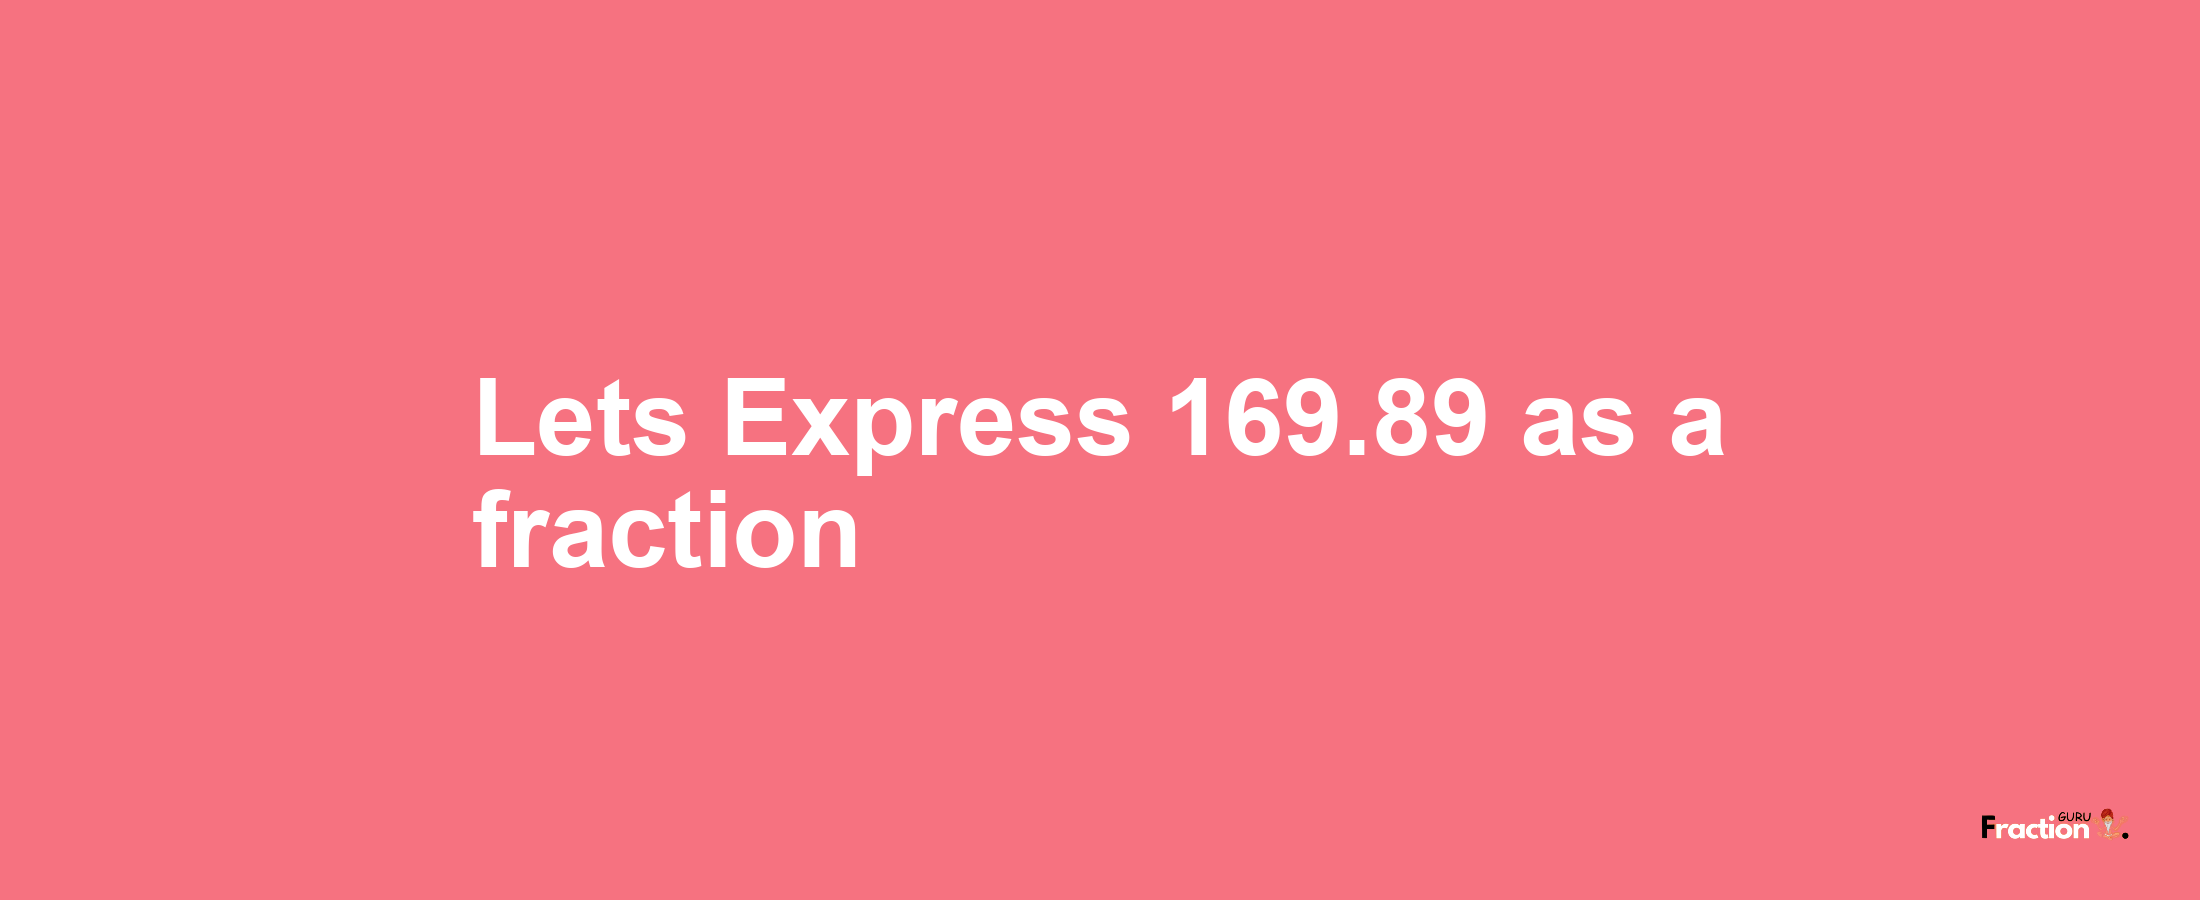 Lets Express 169.89 as afraction